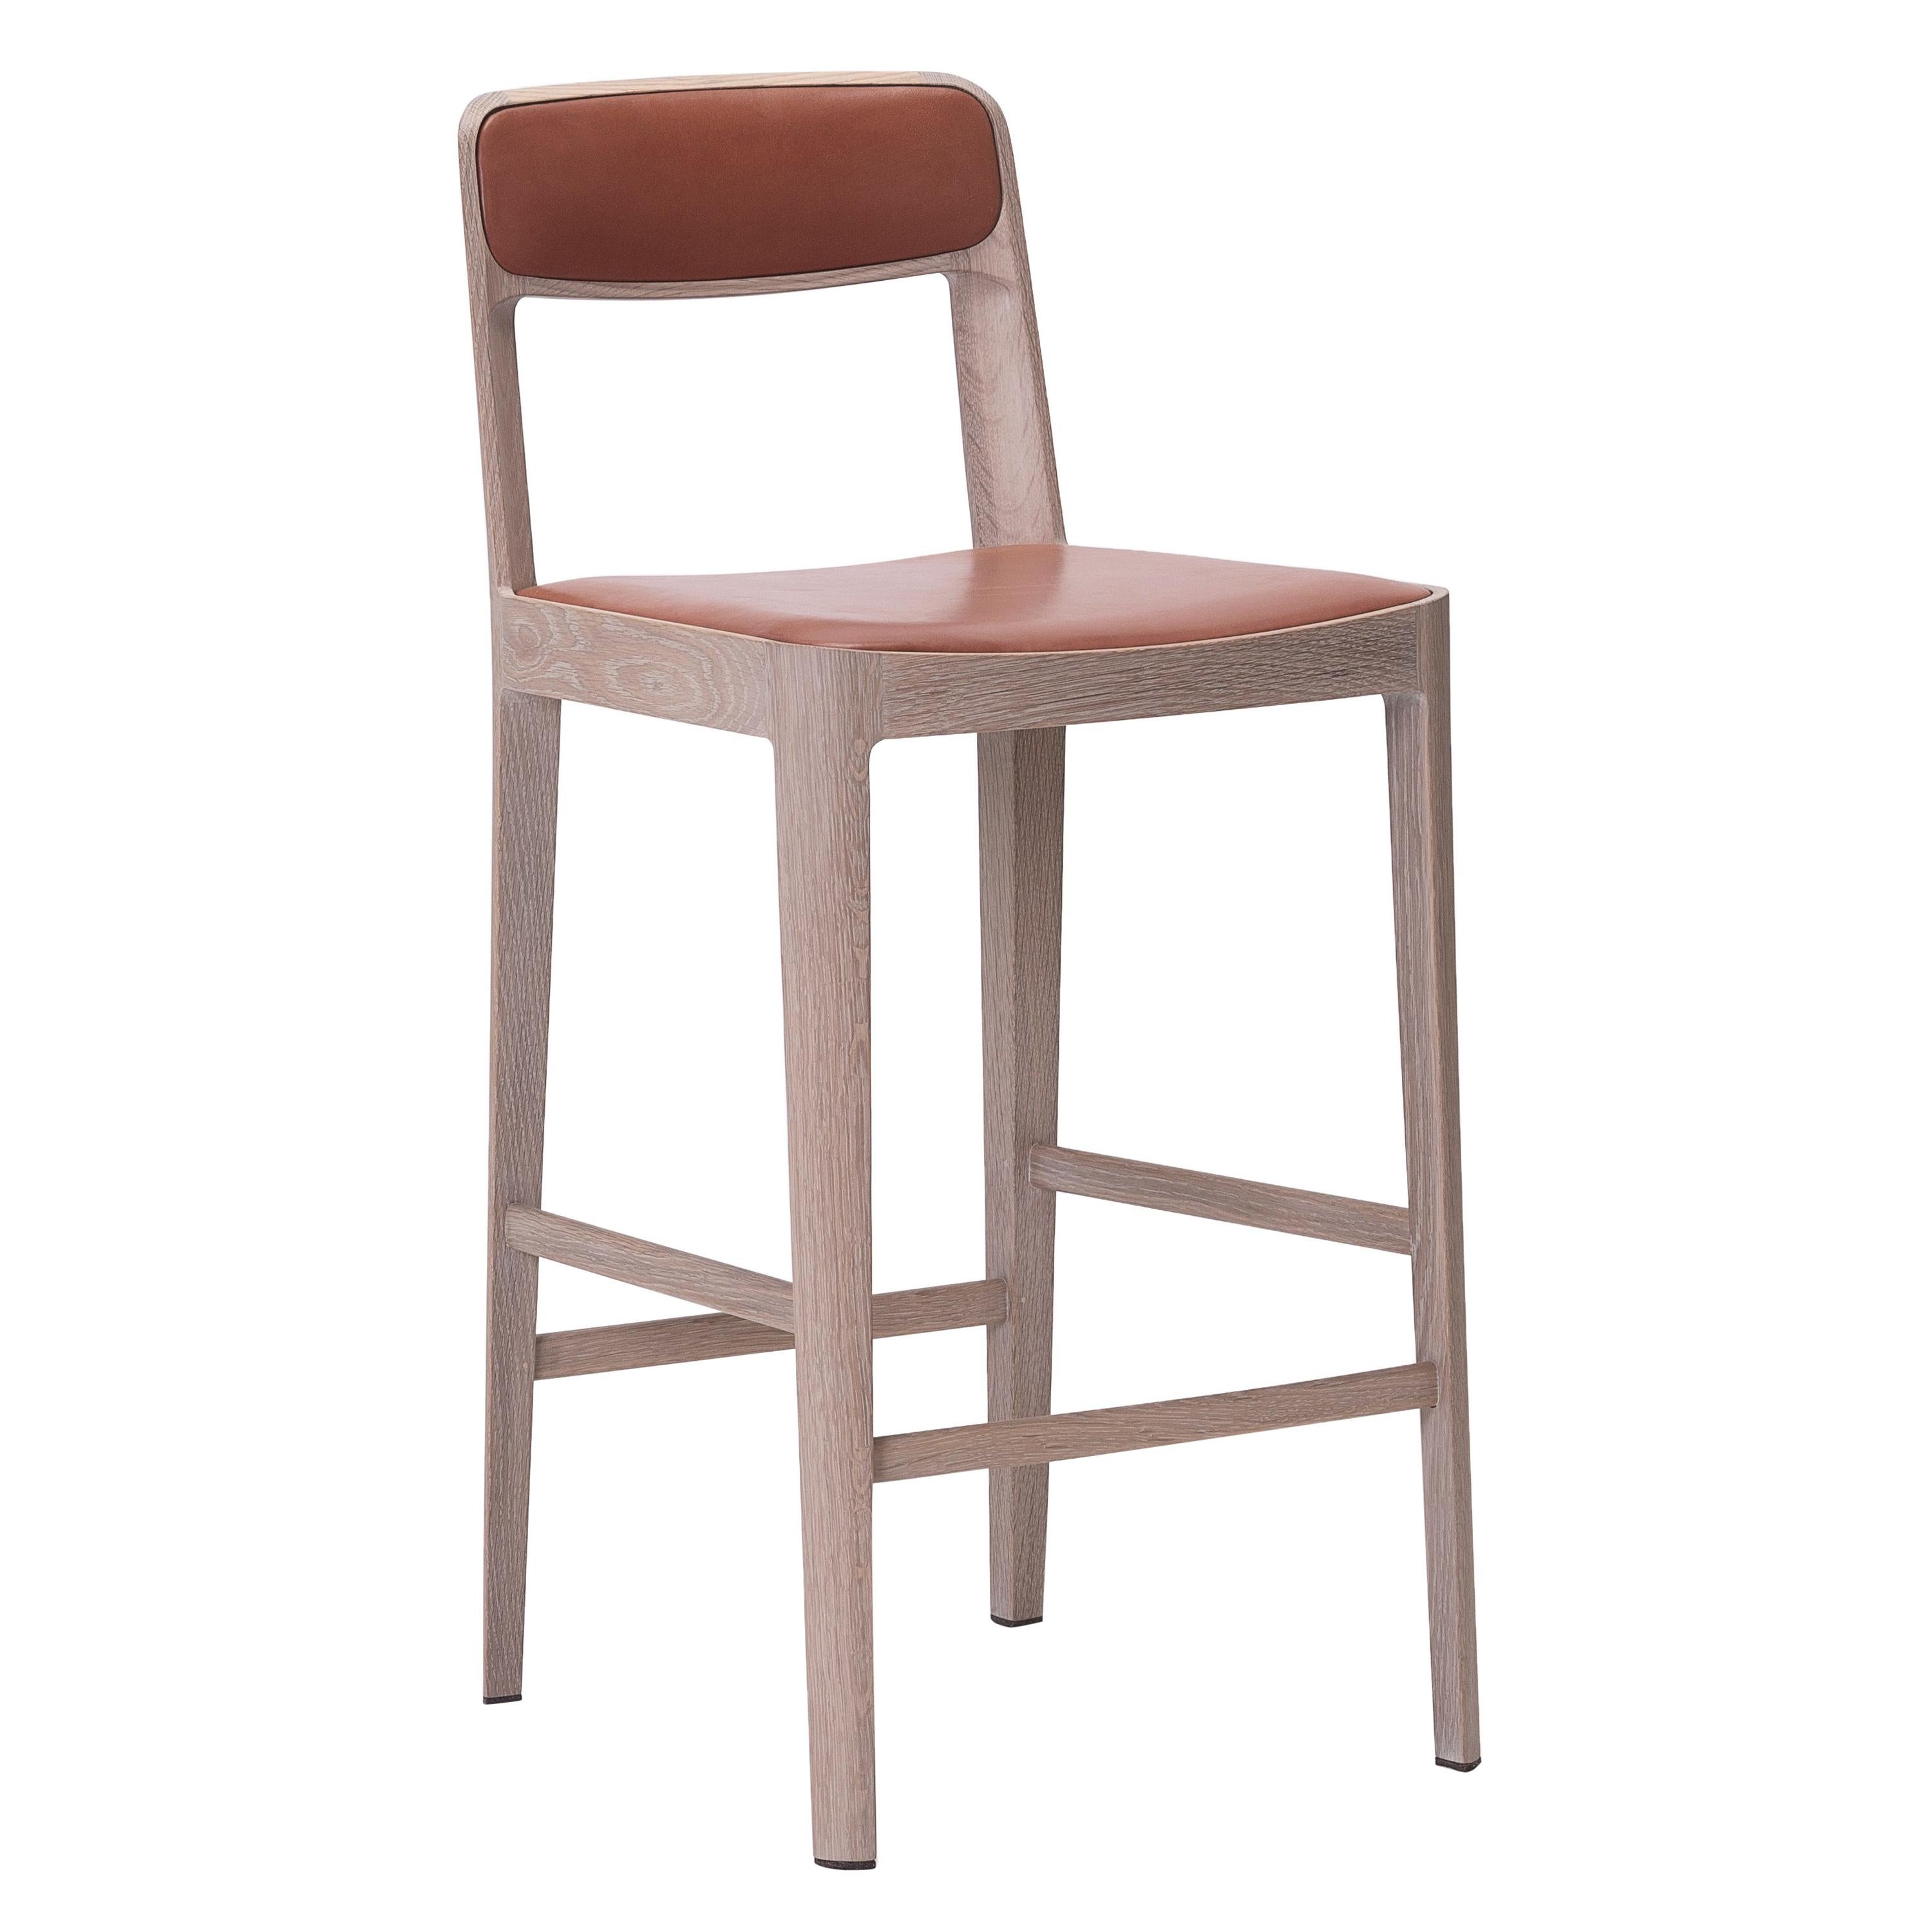 Linea Barstool, White Oak with Upholstered Seat and Backrest in Leather (Russet)